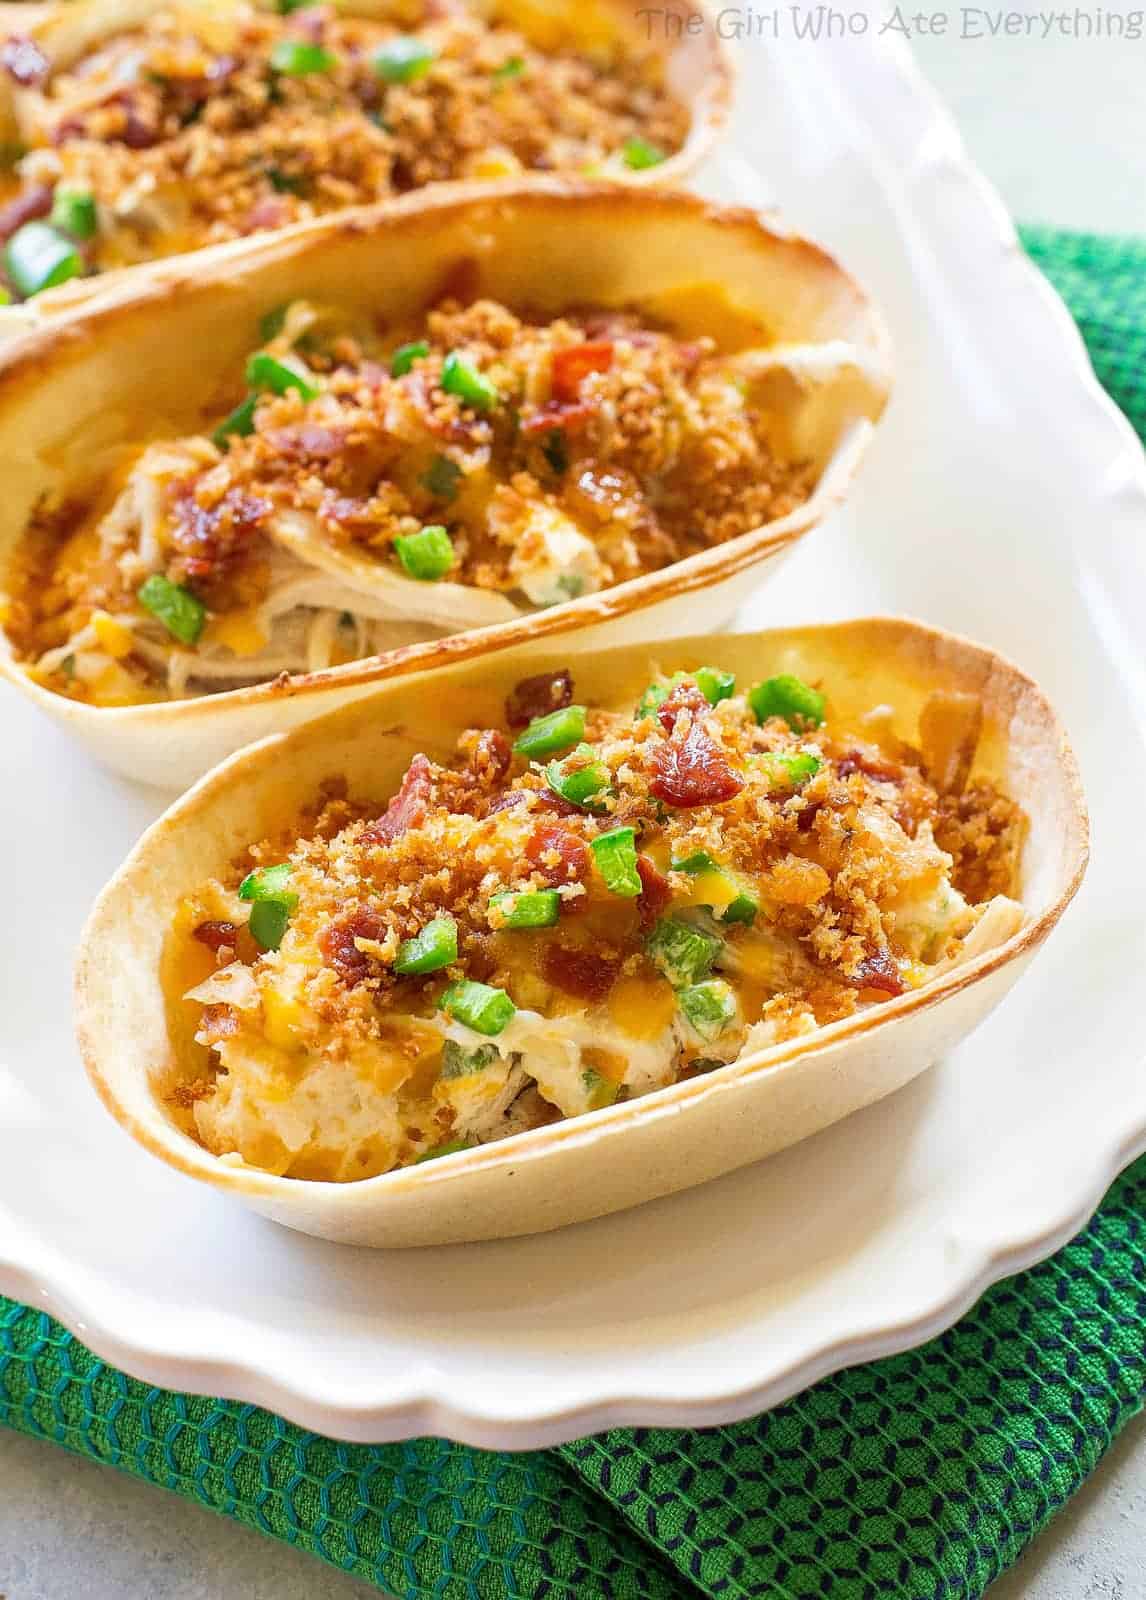 Jalapeno Popper Chicken Tacos - so good! Creamy, a little spicy, and with crunchy Panko topping on top! the-girl-who-ate-everything.com